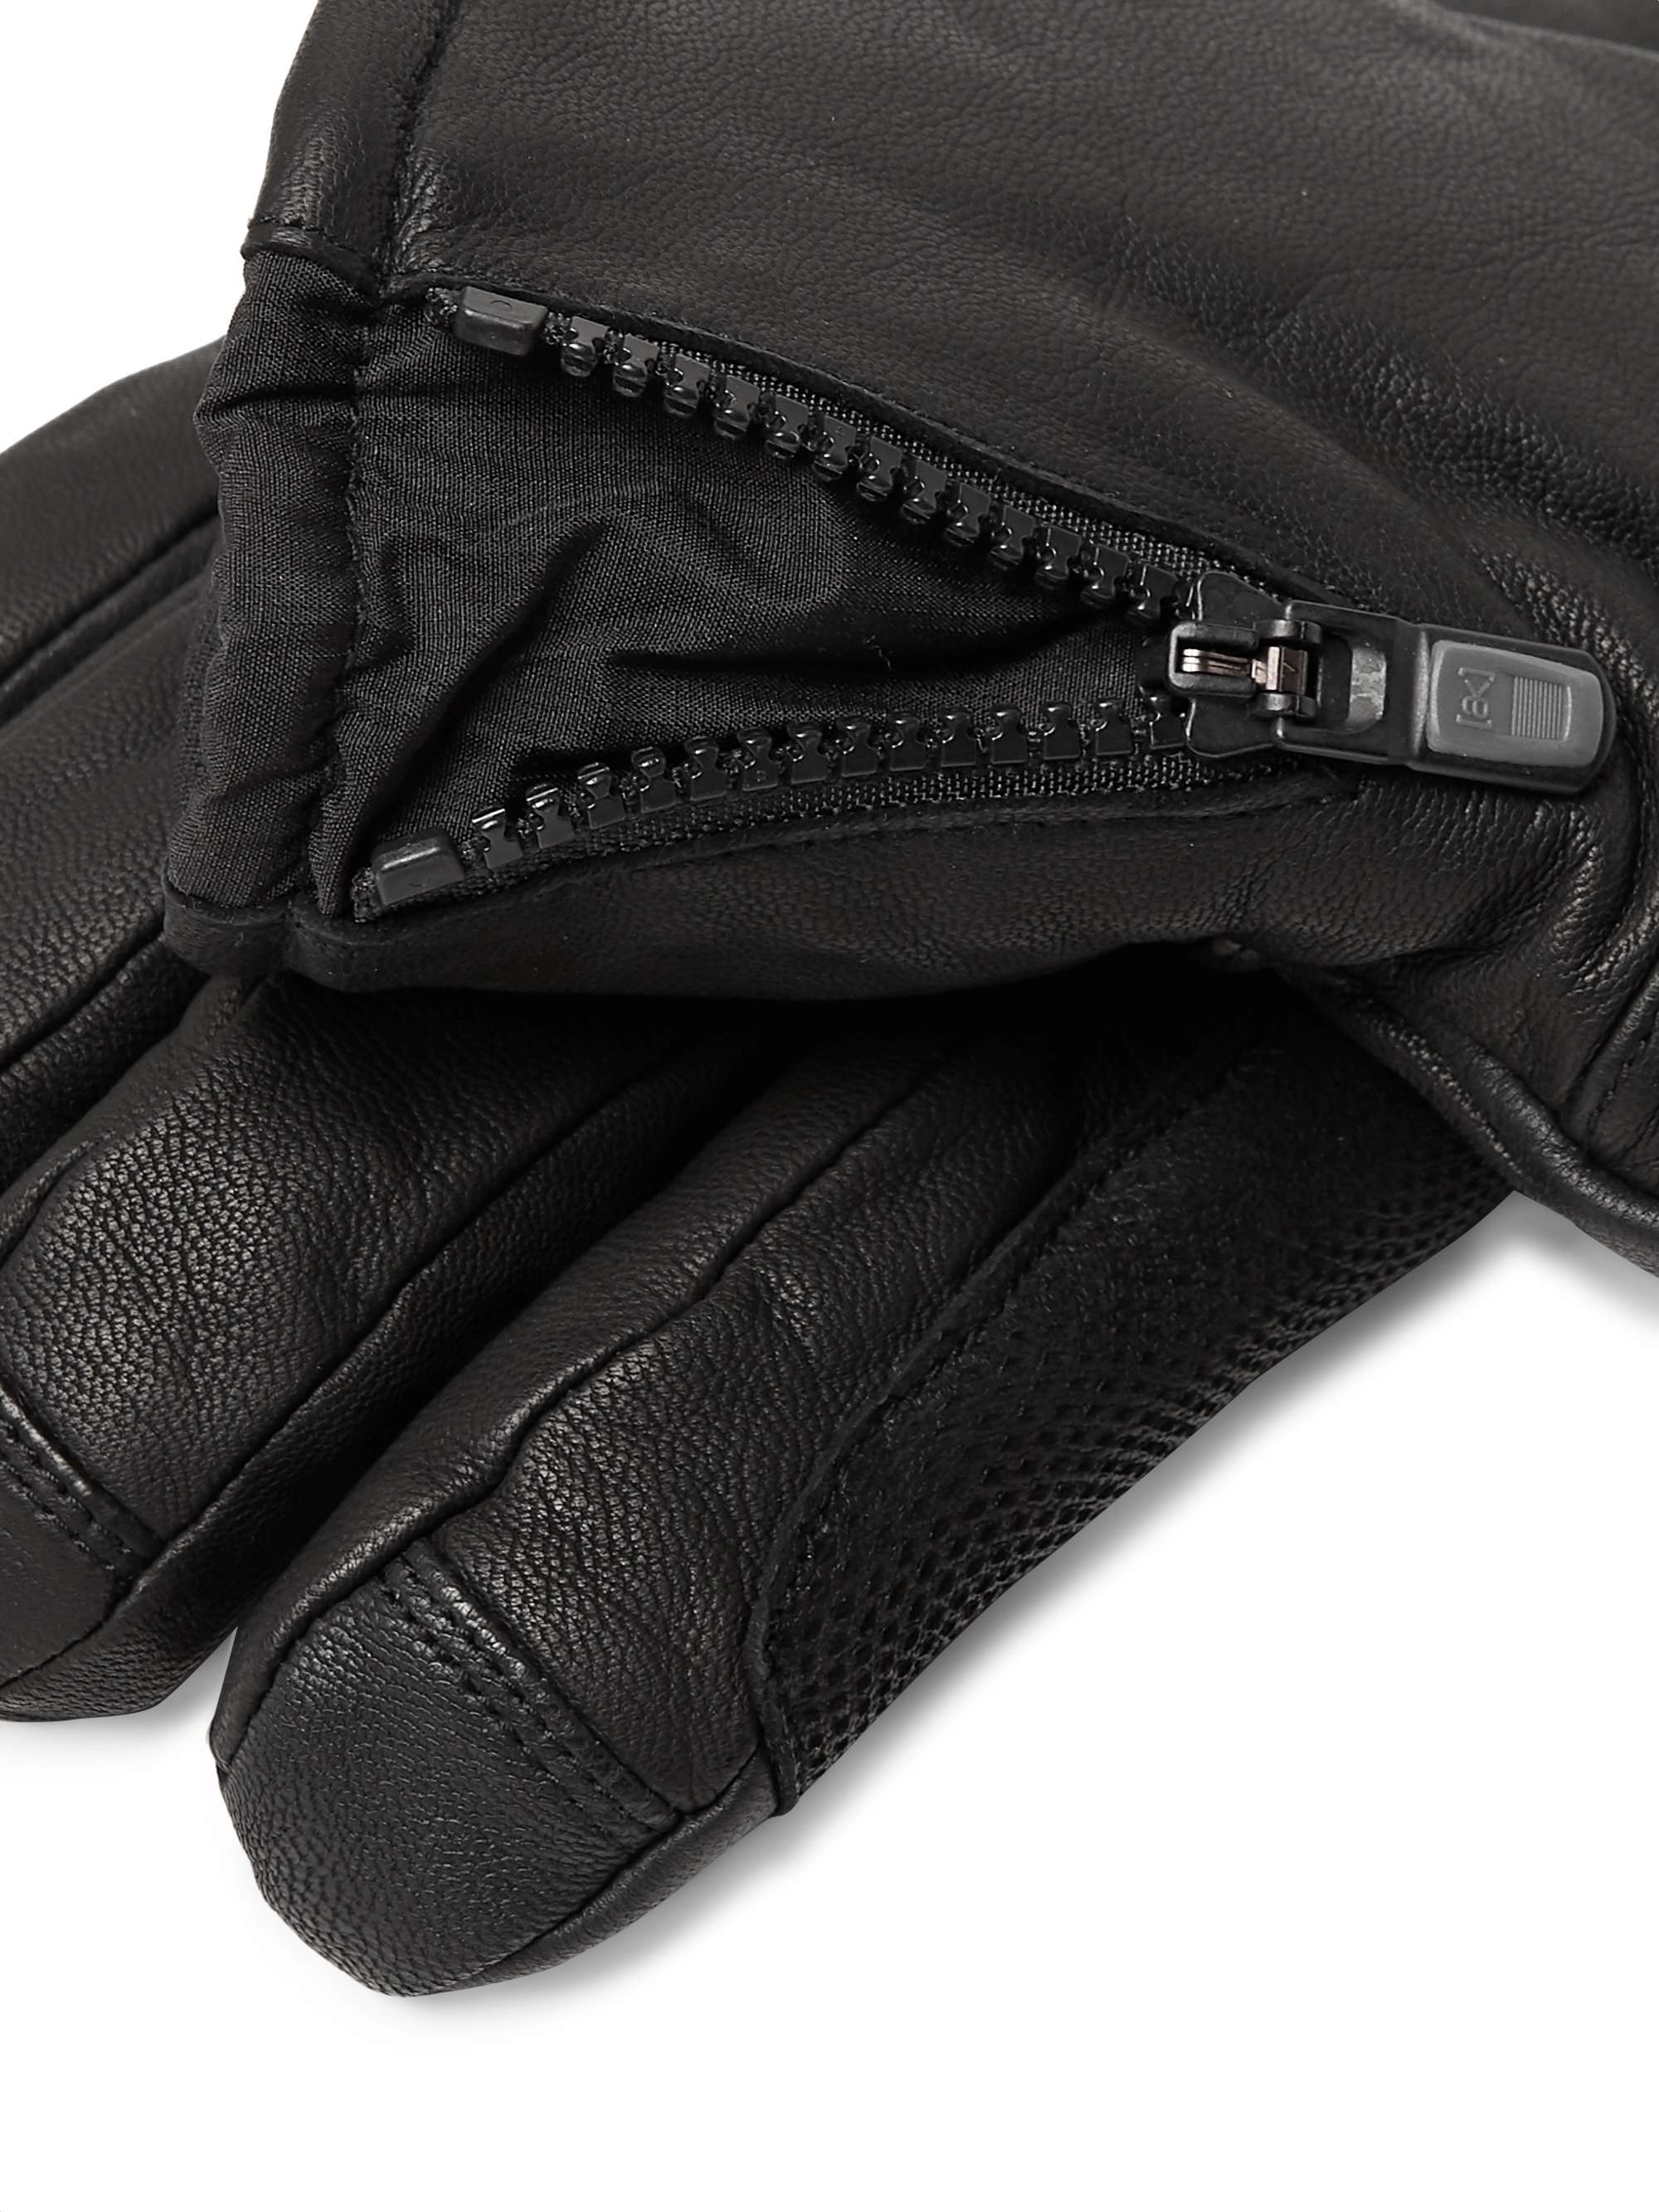 BURTON ak Guide Touchscreen Leather and GORE-TEX Gloves